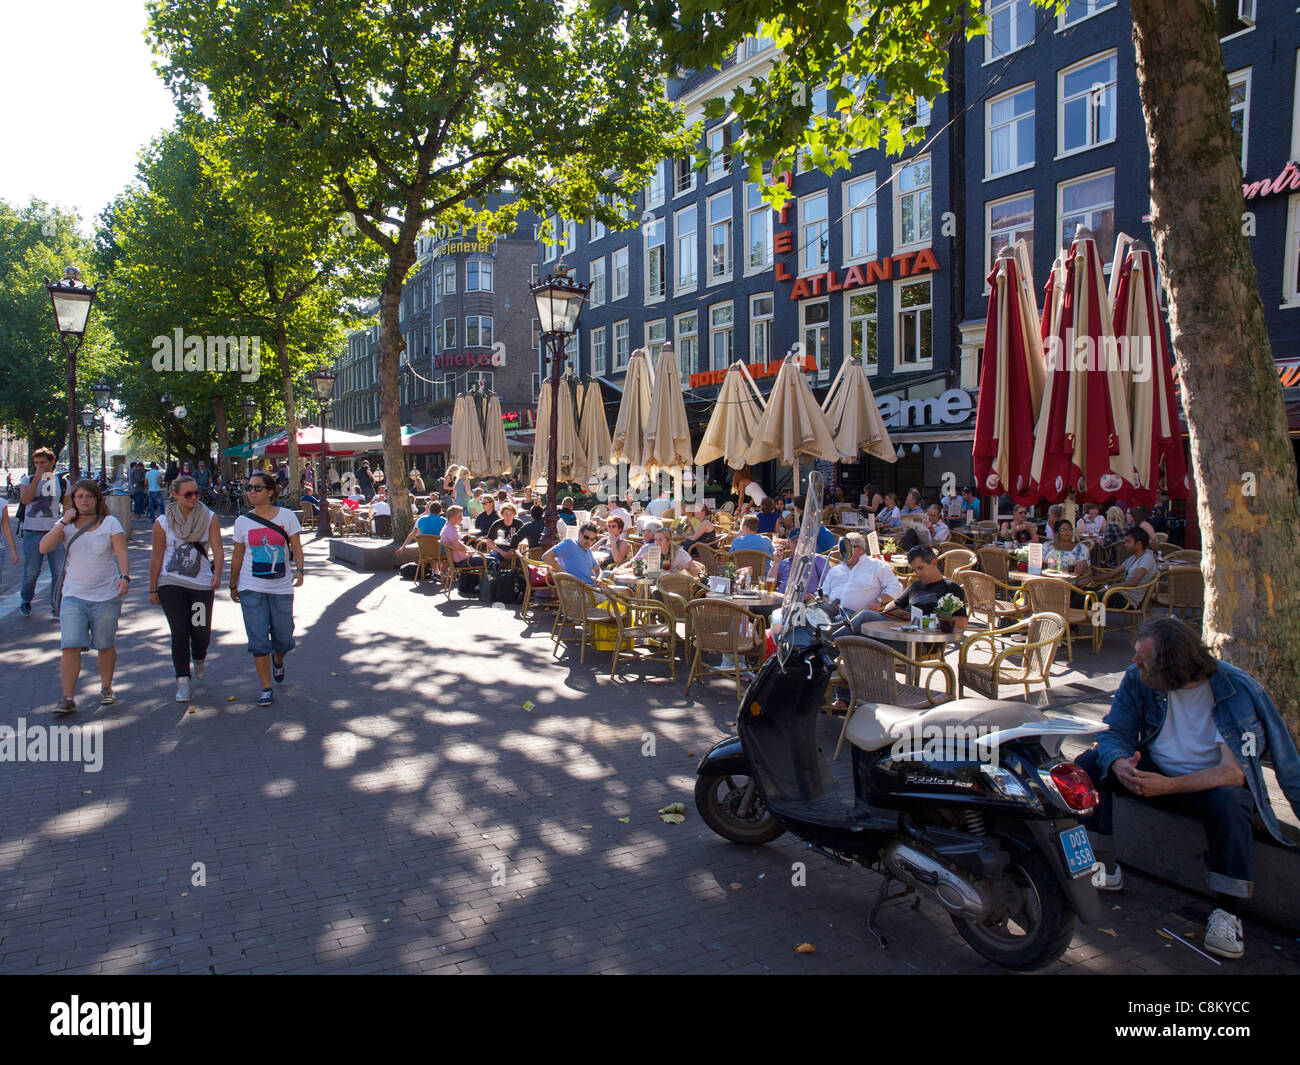 Rembrandtplein rembrandt square in Amsterdam the Netherlands is a square with many cafes and restaurants Stock Photo